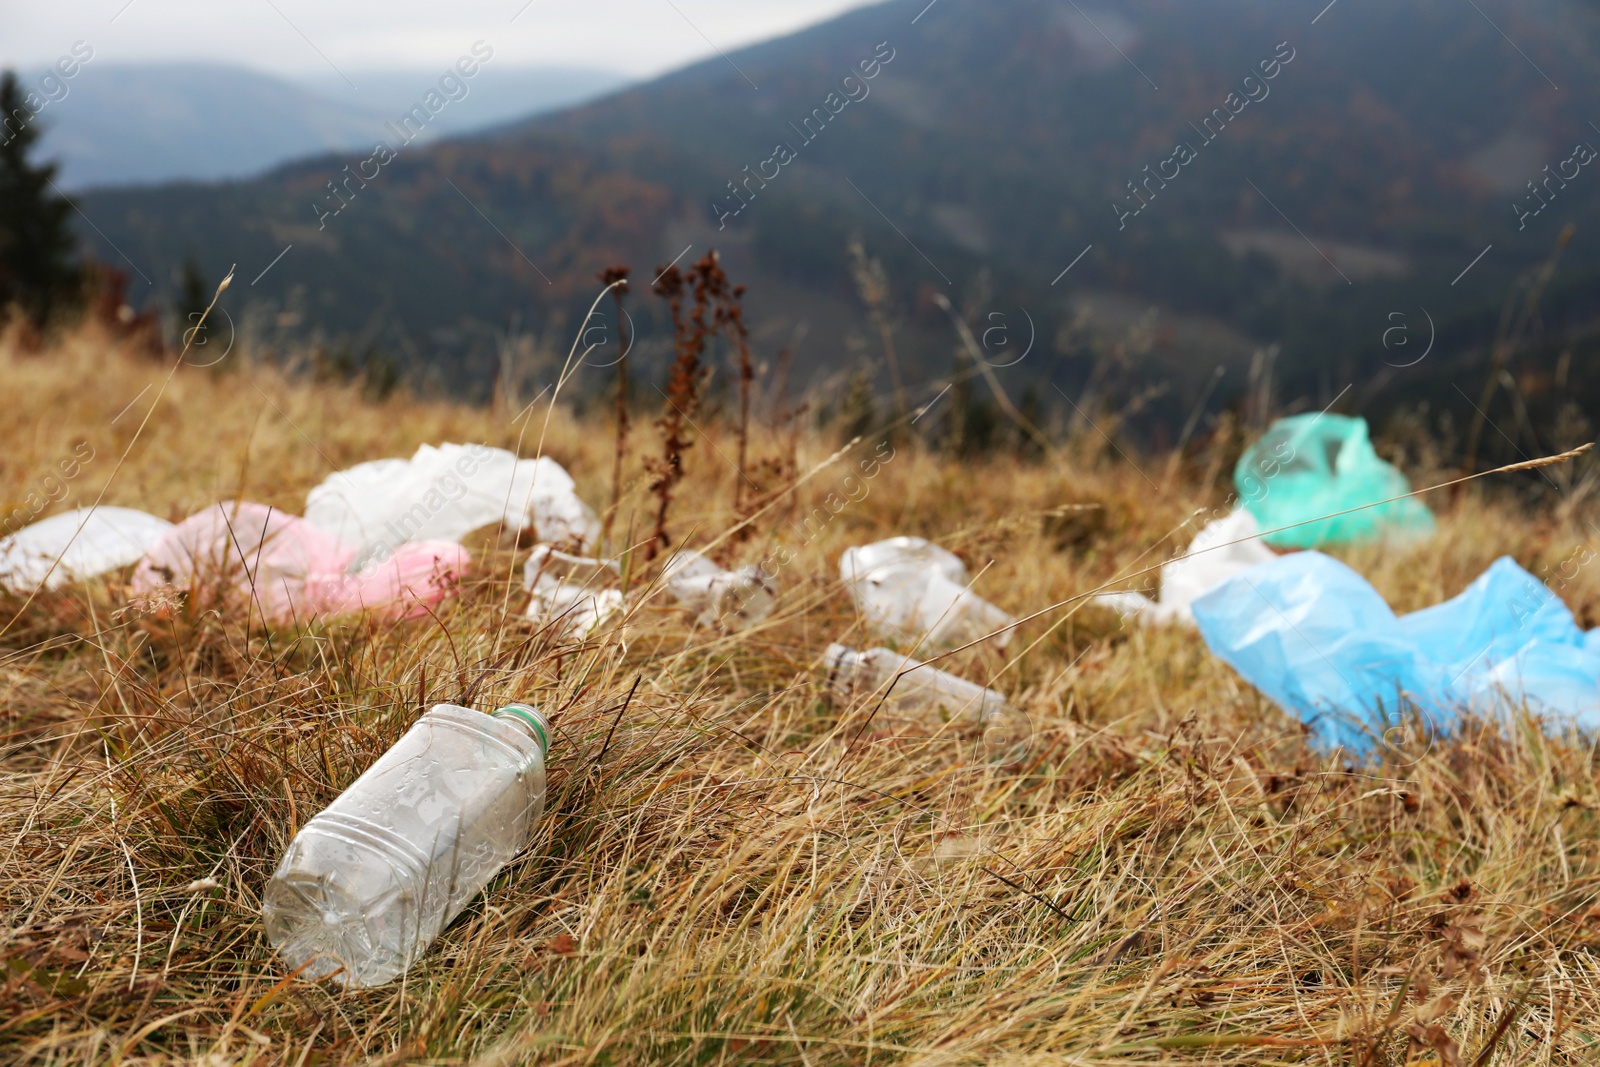 Photo of Plastic garbage scattered on grass in nature